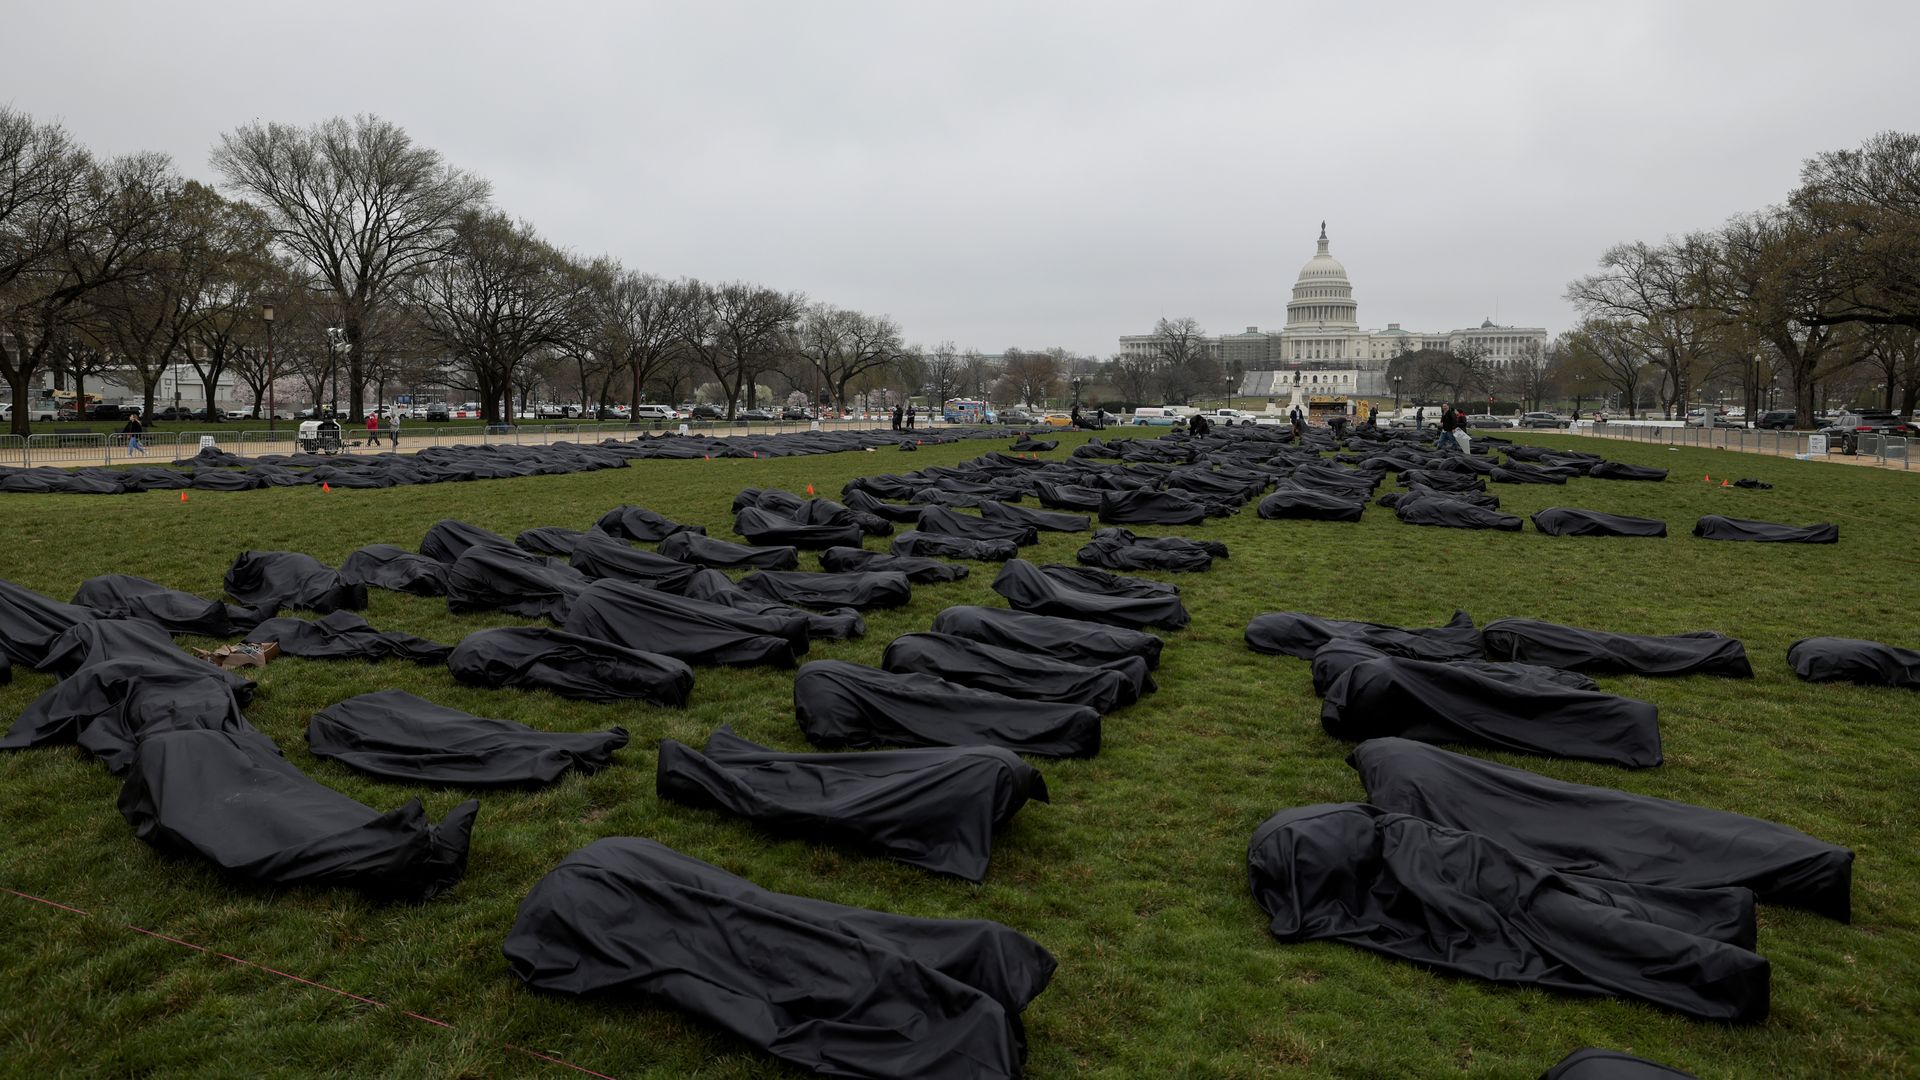 Body bags are assembled on the National Mall by gun control activist group March For Our Lives on March 24, 2022 in Washington, DC. 